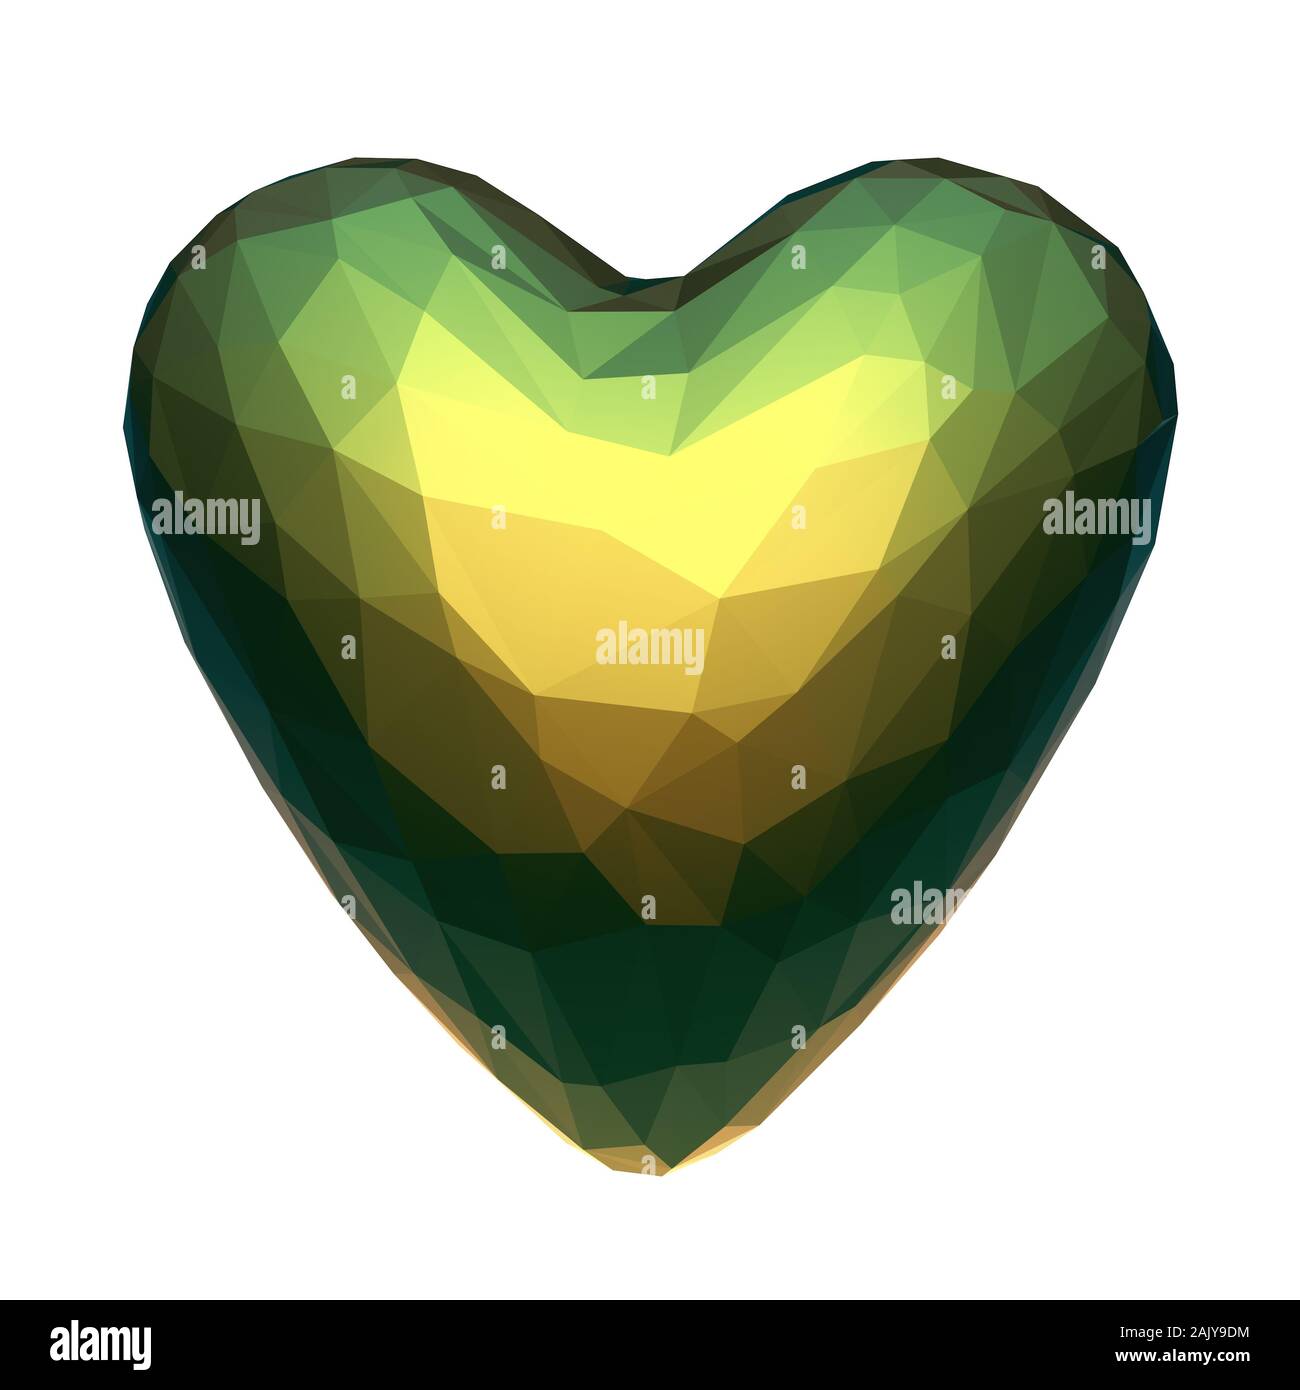 Low poly heart with jewel bug colorful iridescent material. 3D graphic with low polygon mesh. Symbol for love, romance, hard relationship and passion. Stock Photo